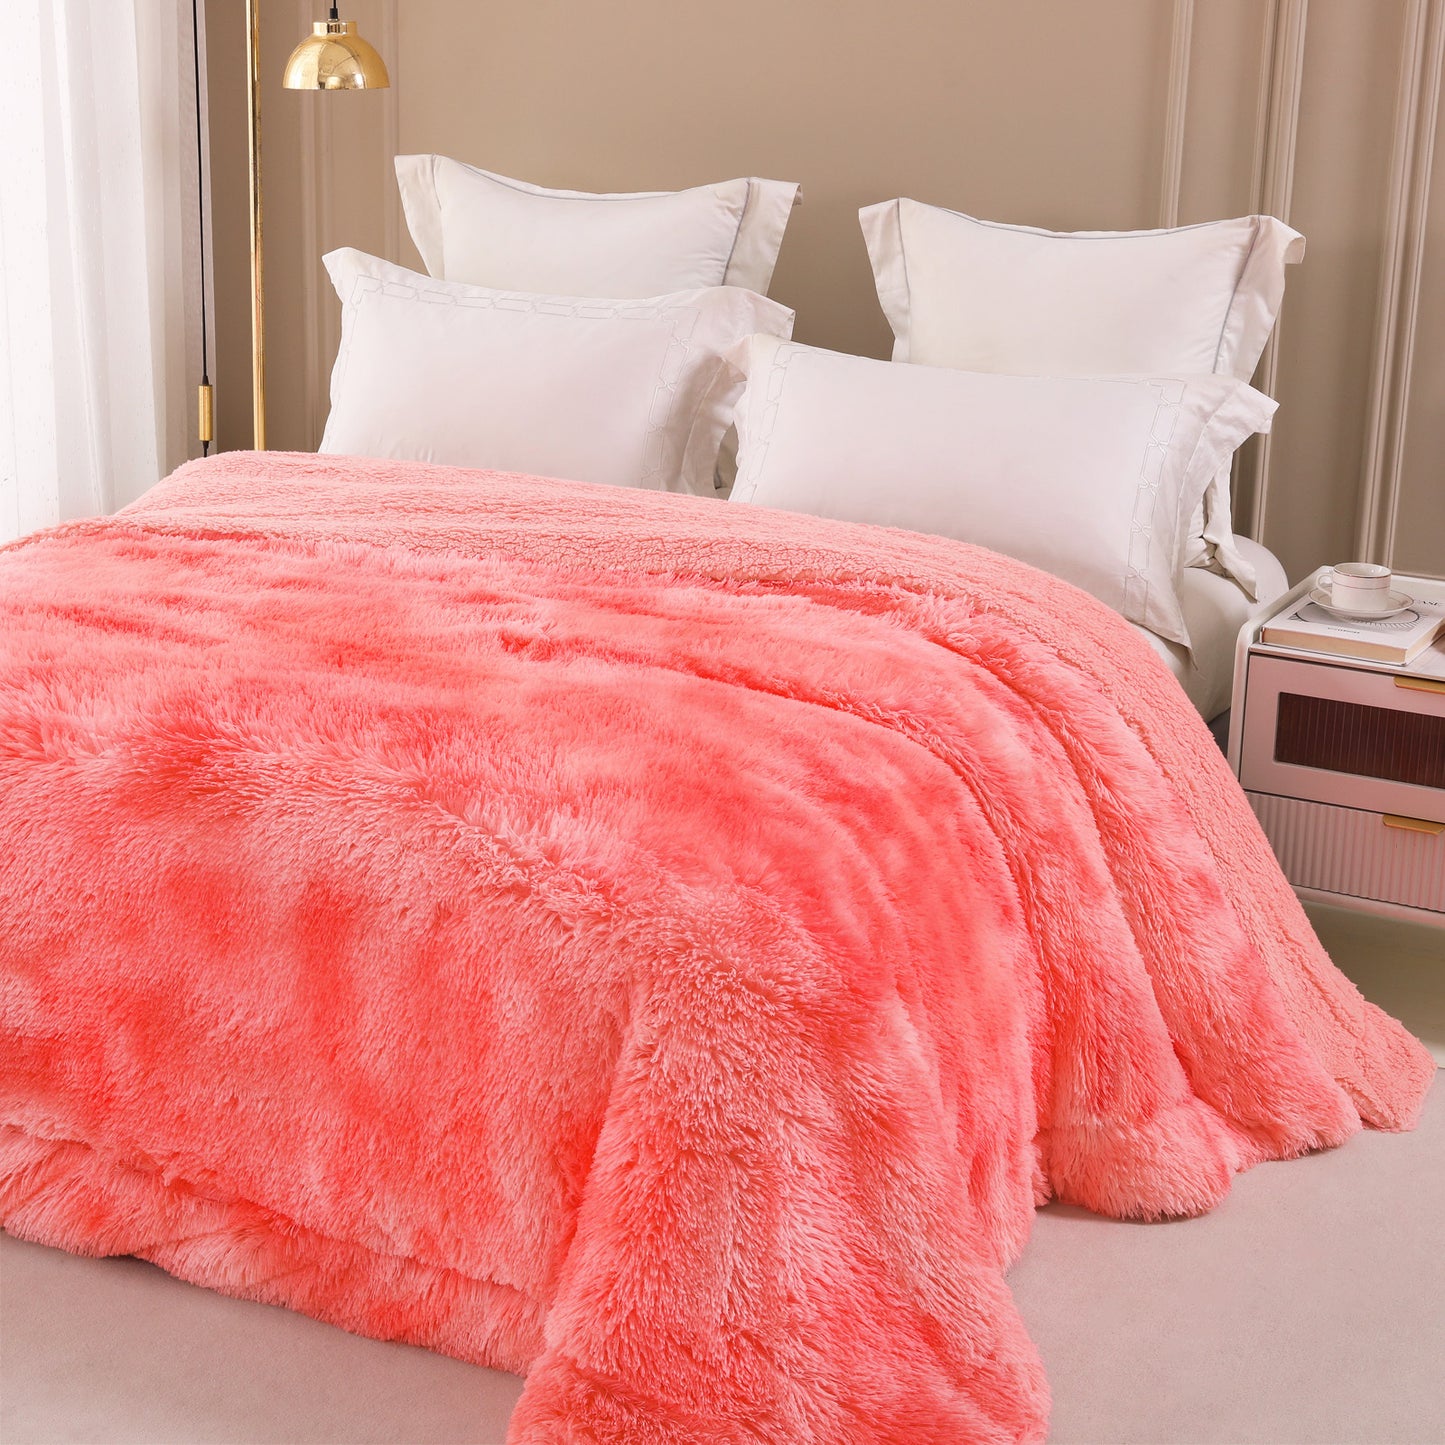 Exclusivo Mezcla Queen Size Faux Fur Bed Blanket, Super Soft Fuzzy and Plush Reversible Sherpa Fleece Blanket and Warm Blankets for Bed, Sofa, Travel, 90X90 inches, Pink